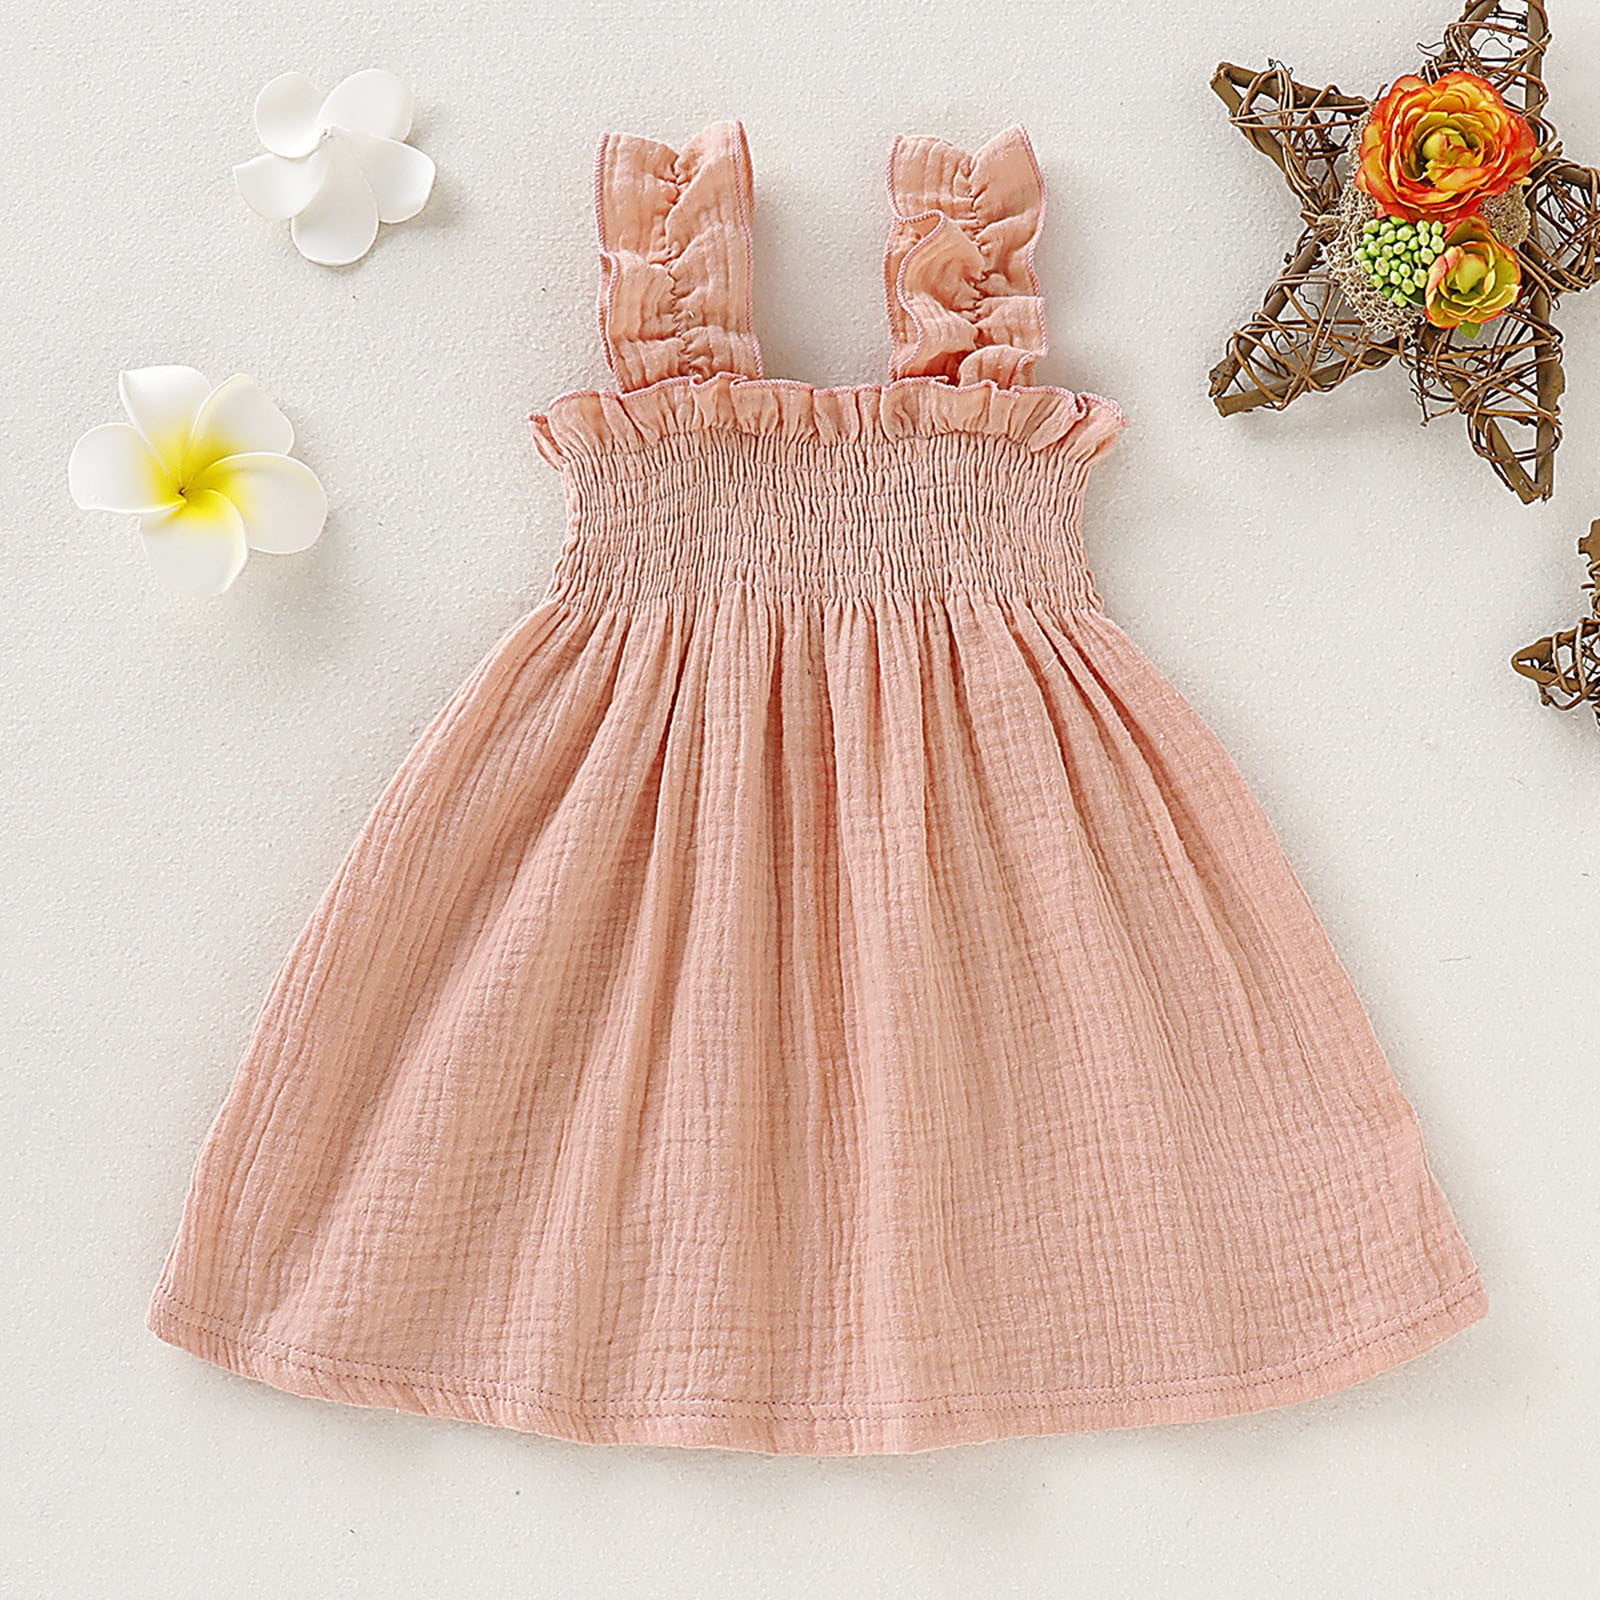 Girls Dresses New Brand Spring Princess Dress Kids Clothes Printed wit –  Toyszoom